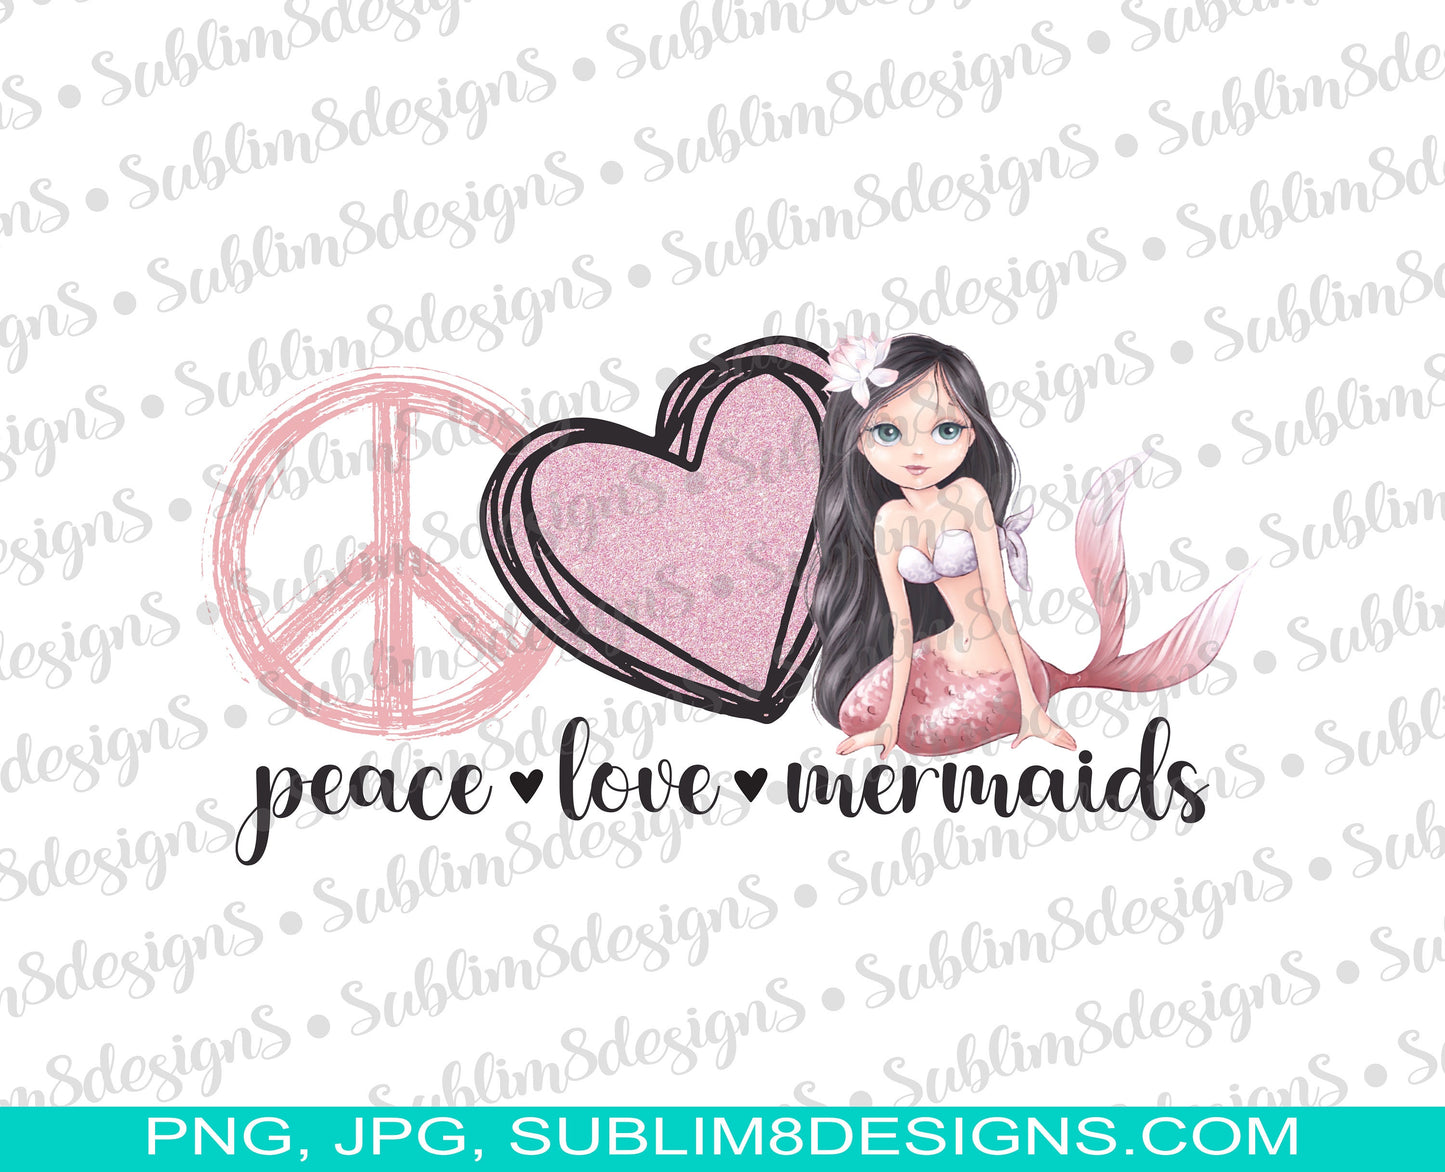 Peace Love Mermaids PNG and JPG ONLY